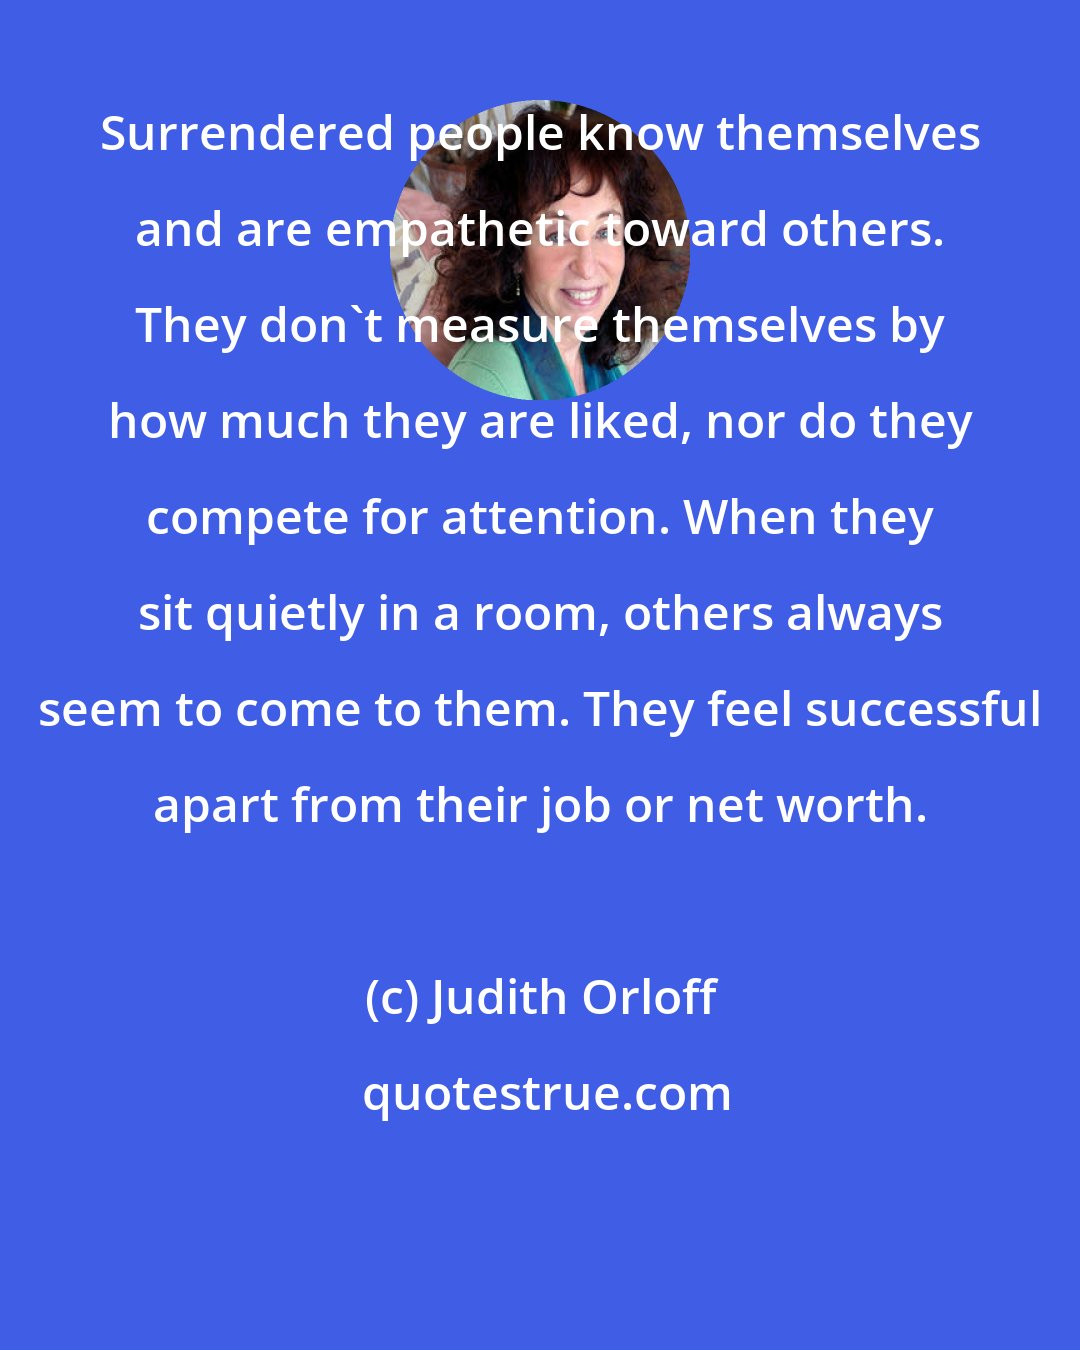 Judith Orloff: Surrendered people know themselves and are empathetic toward others. They don't measure themselves by how much they are liked, nor do they compete for attention. When they sit quietly in a room, others always seem to come to them. They feel successful apart from their job or net worth.